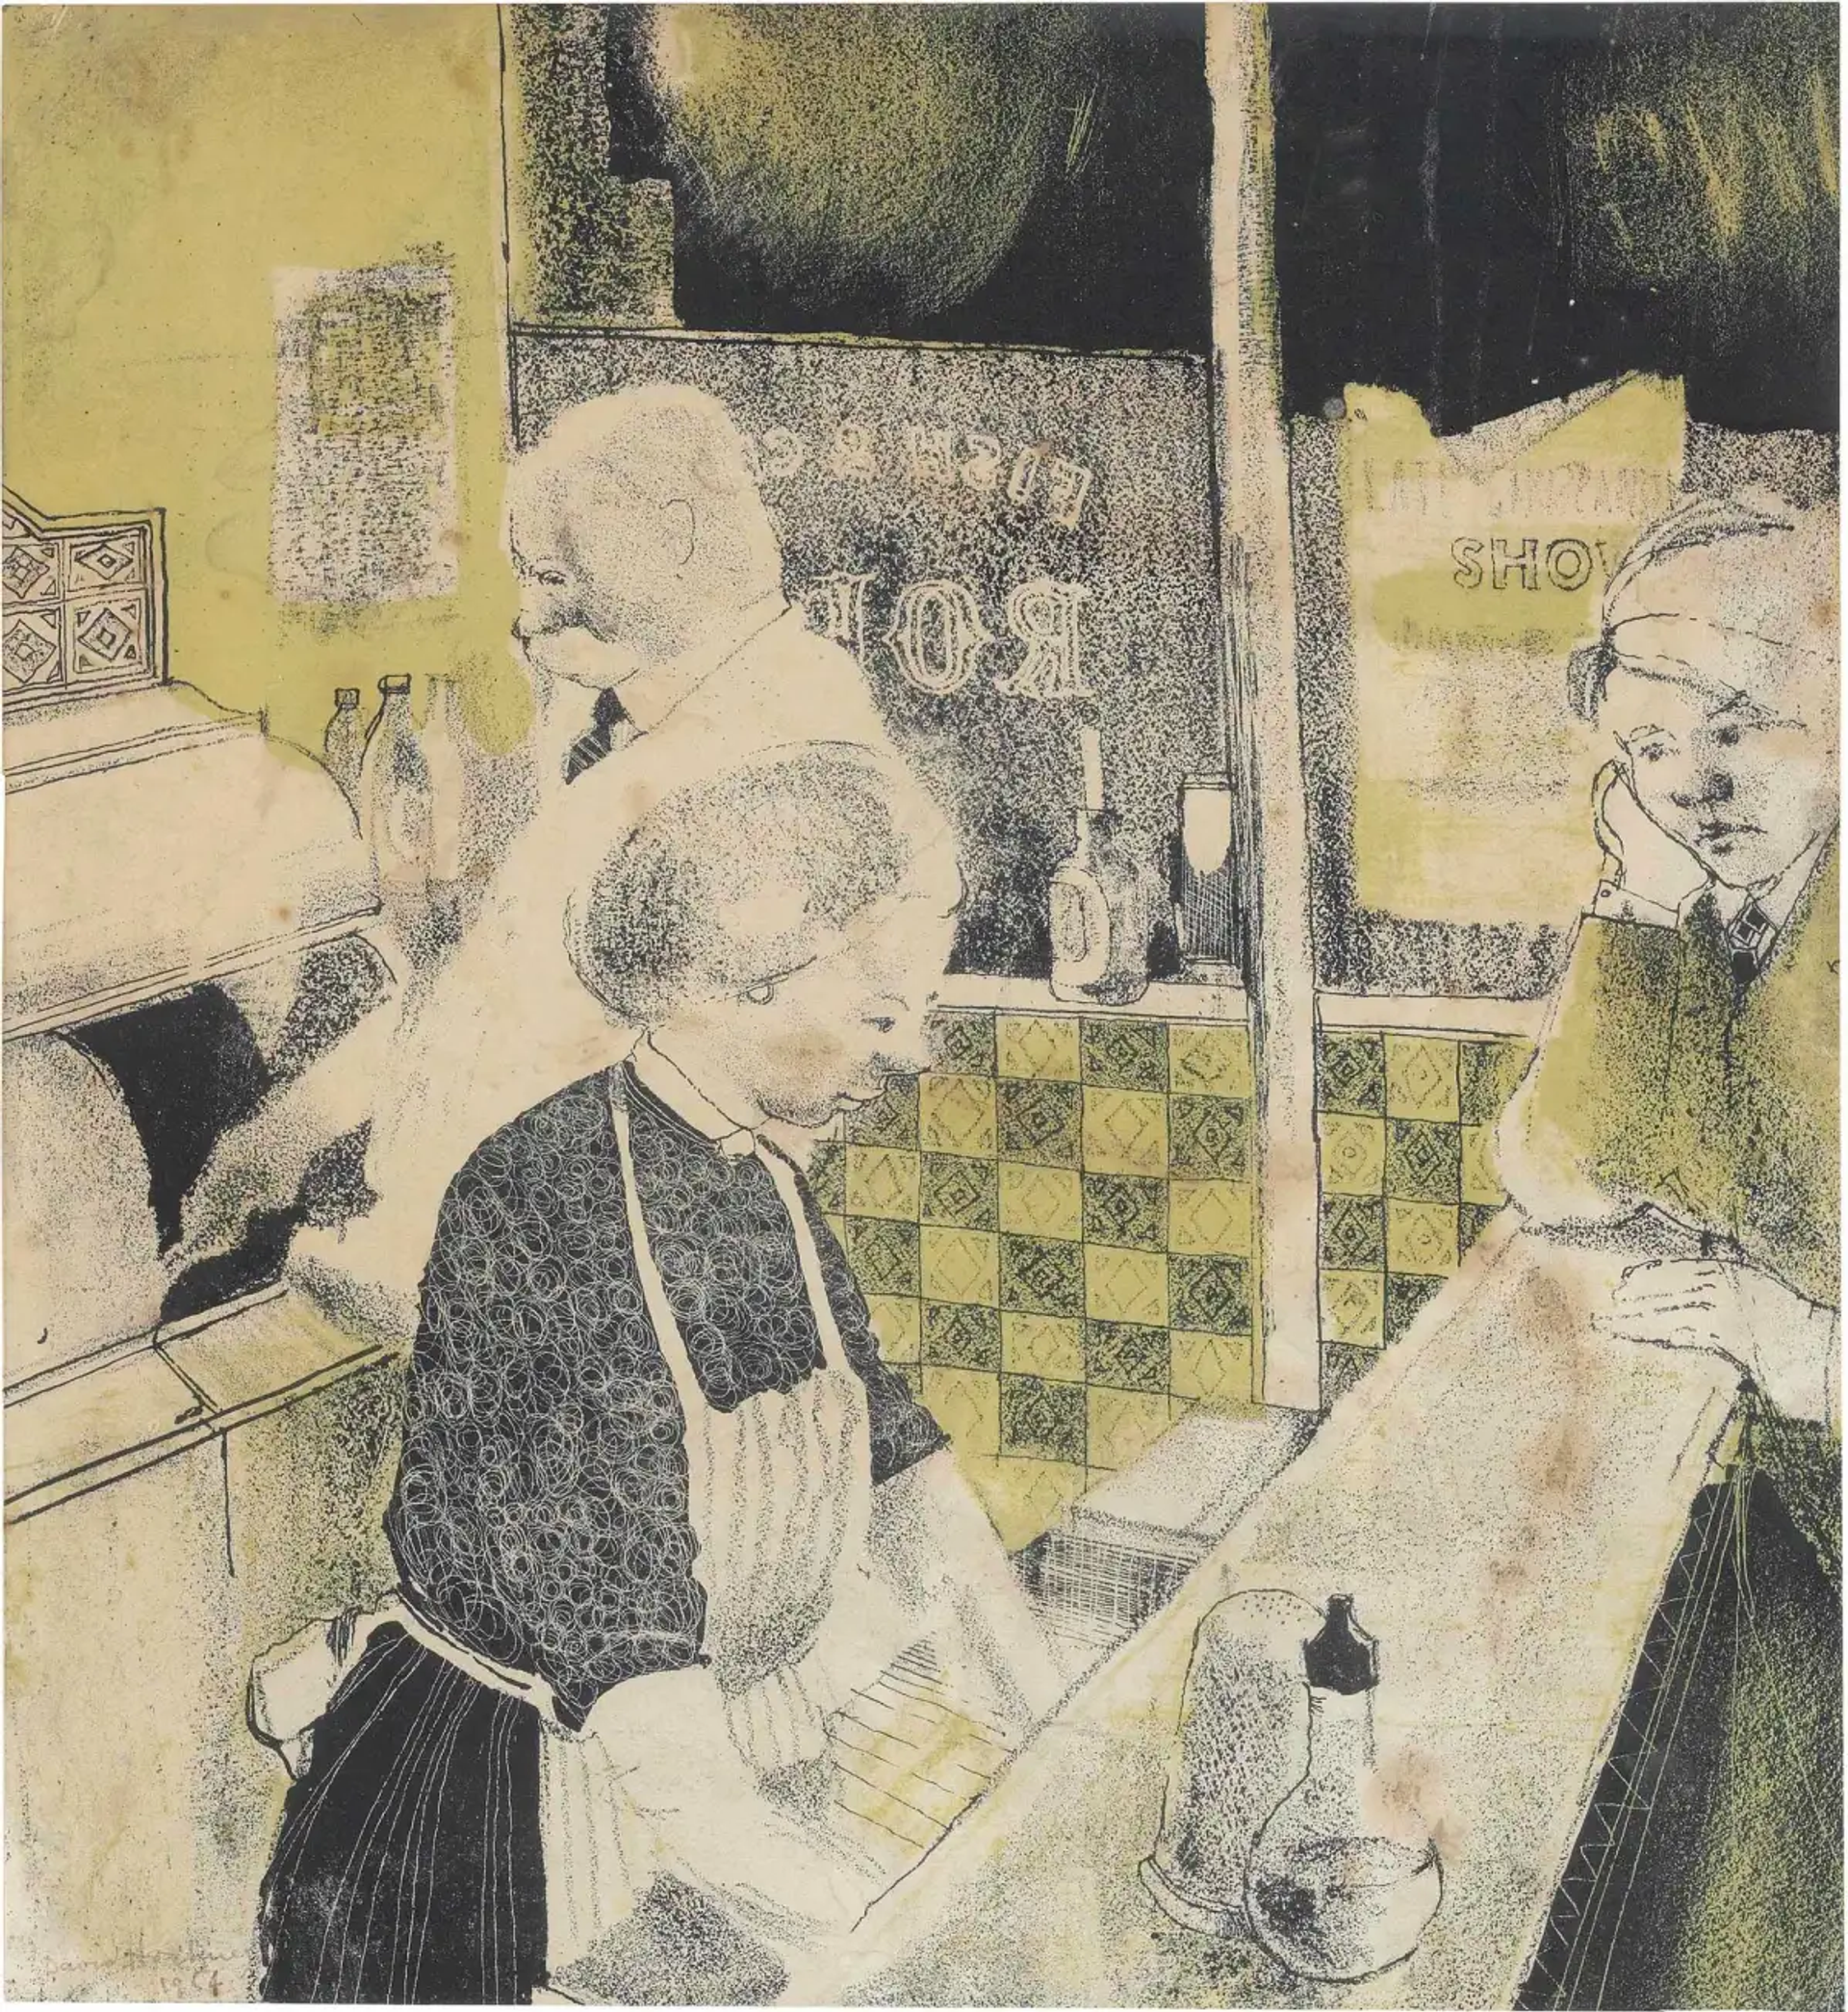 This signed print British artist David Hockney depicts a traditional British fish and chip shop in the artist’s native Bradford, Yorkshire, it is an example of one of the artist’s earliest works.